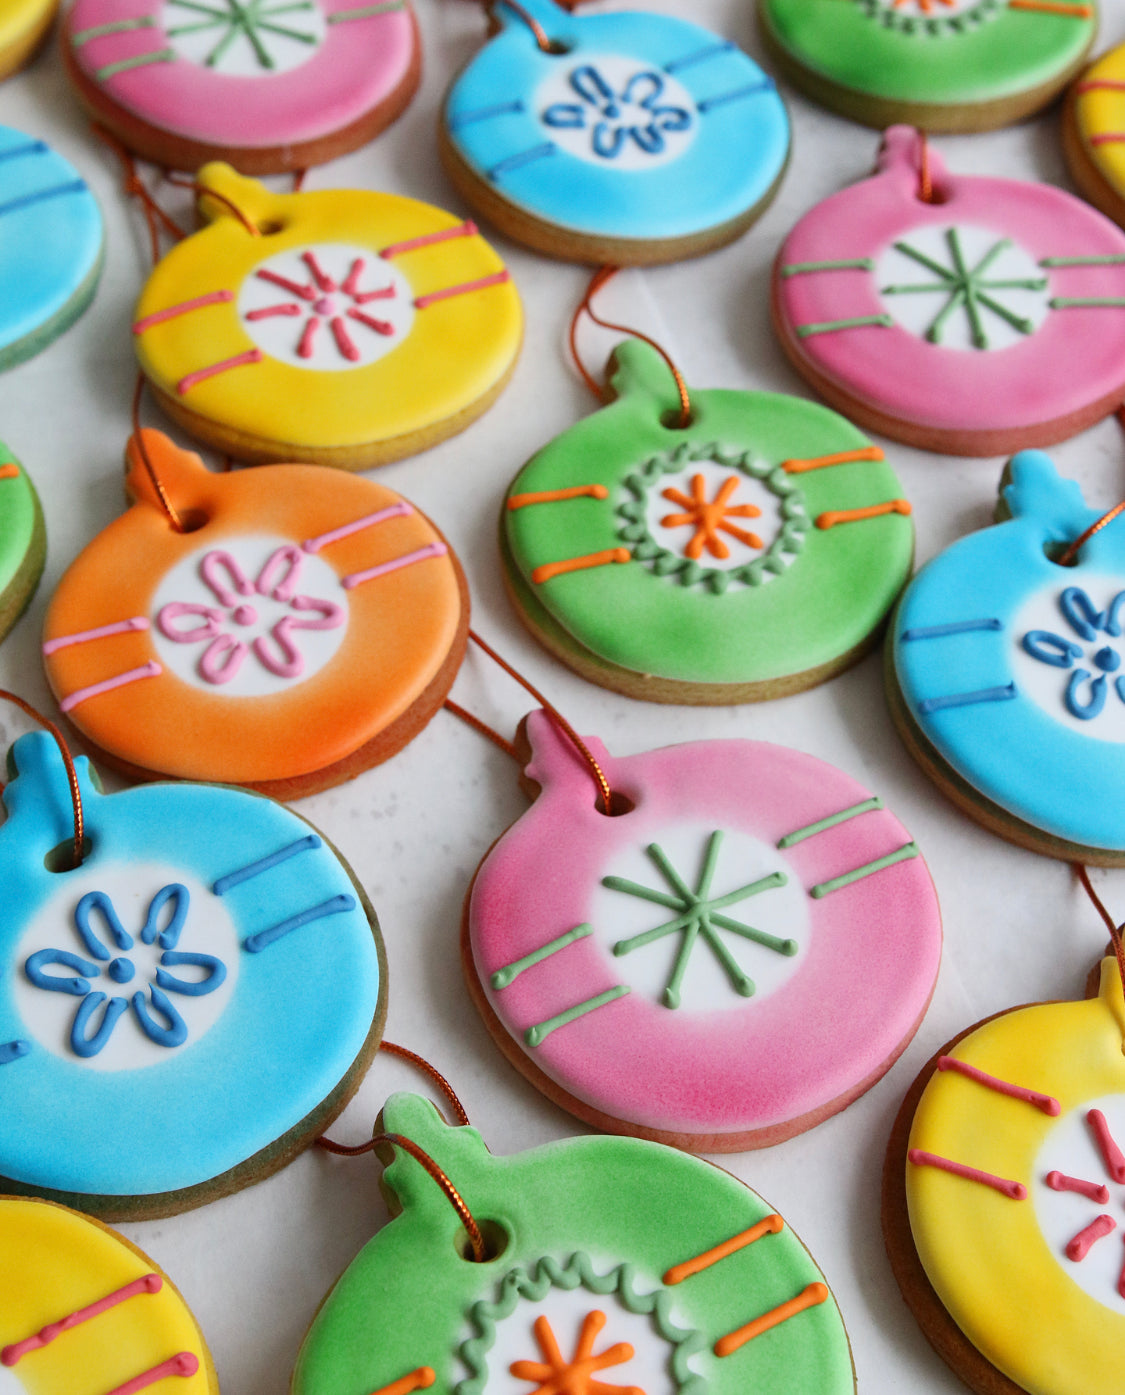 Christmas Bauble Biscuits at Angle